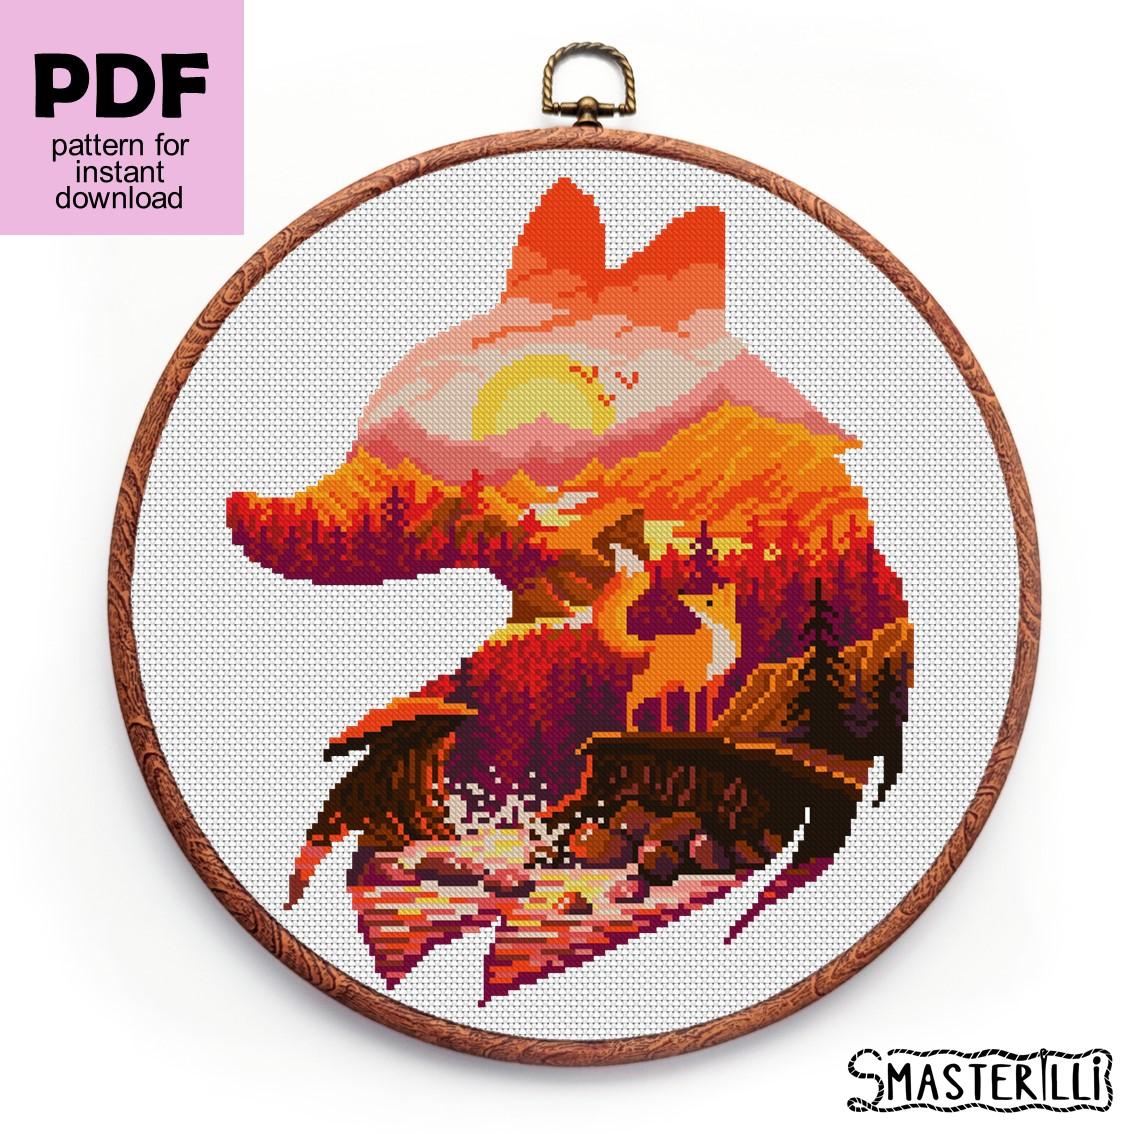 Fox silhouette with autumn forest on sunset cross stitch pattern PDF by Smasterilli. Digital cross stitch pattern for instant download. Forest animals and landscape embroidery design. #smasterilli #crossstitch #crossstitchpattern #animalsilhouette #foxcrosstitch #autumnlandscape